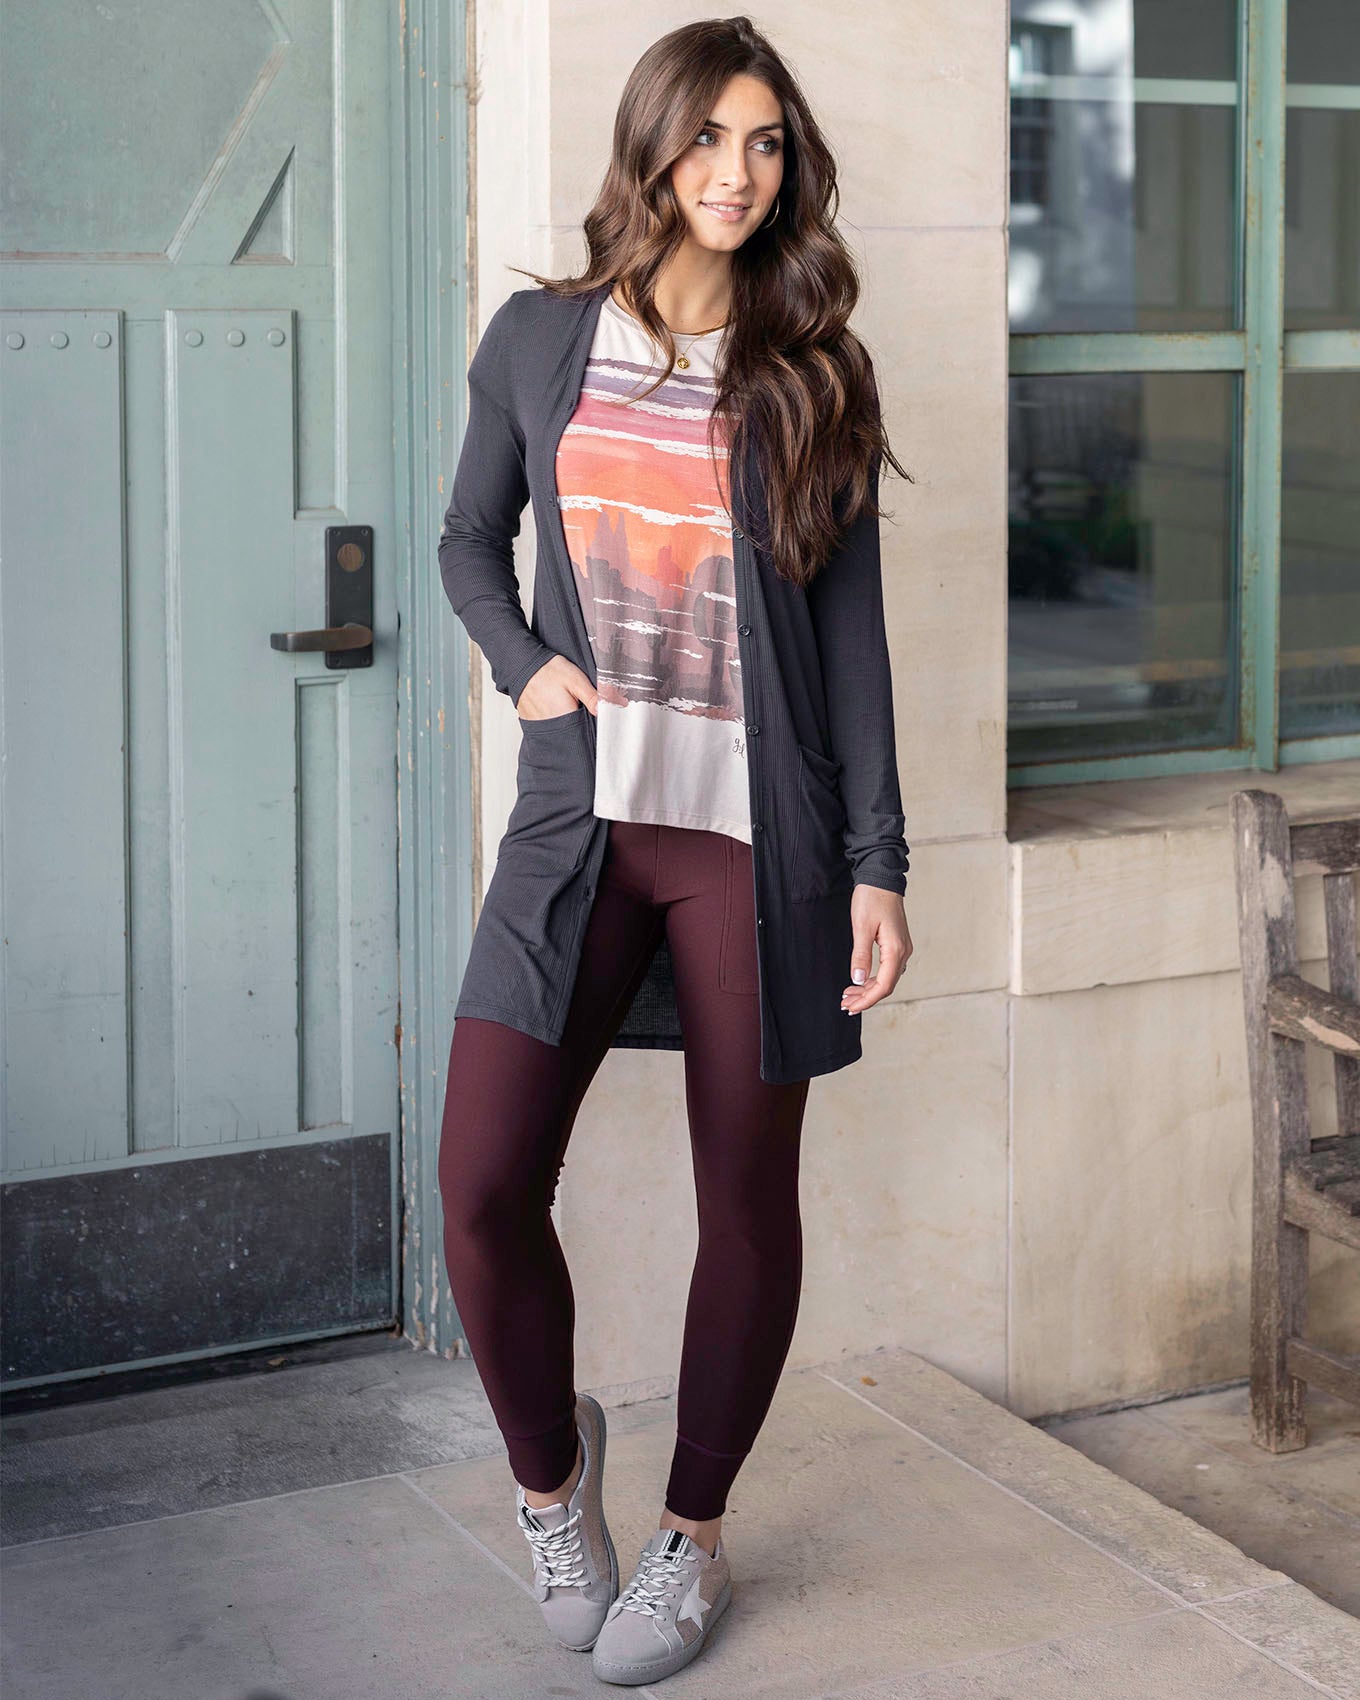 Slide View: 1: Out From Under Cozy Ribbed Legging  Outfits with leggings,  Lounge wear, Women's intimates